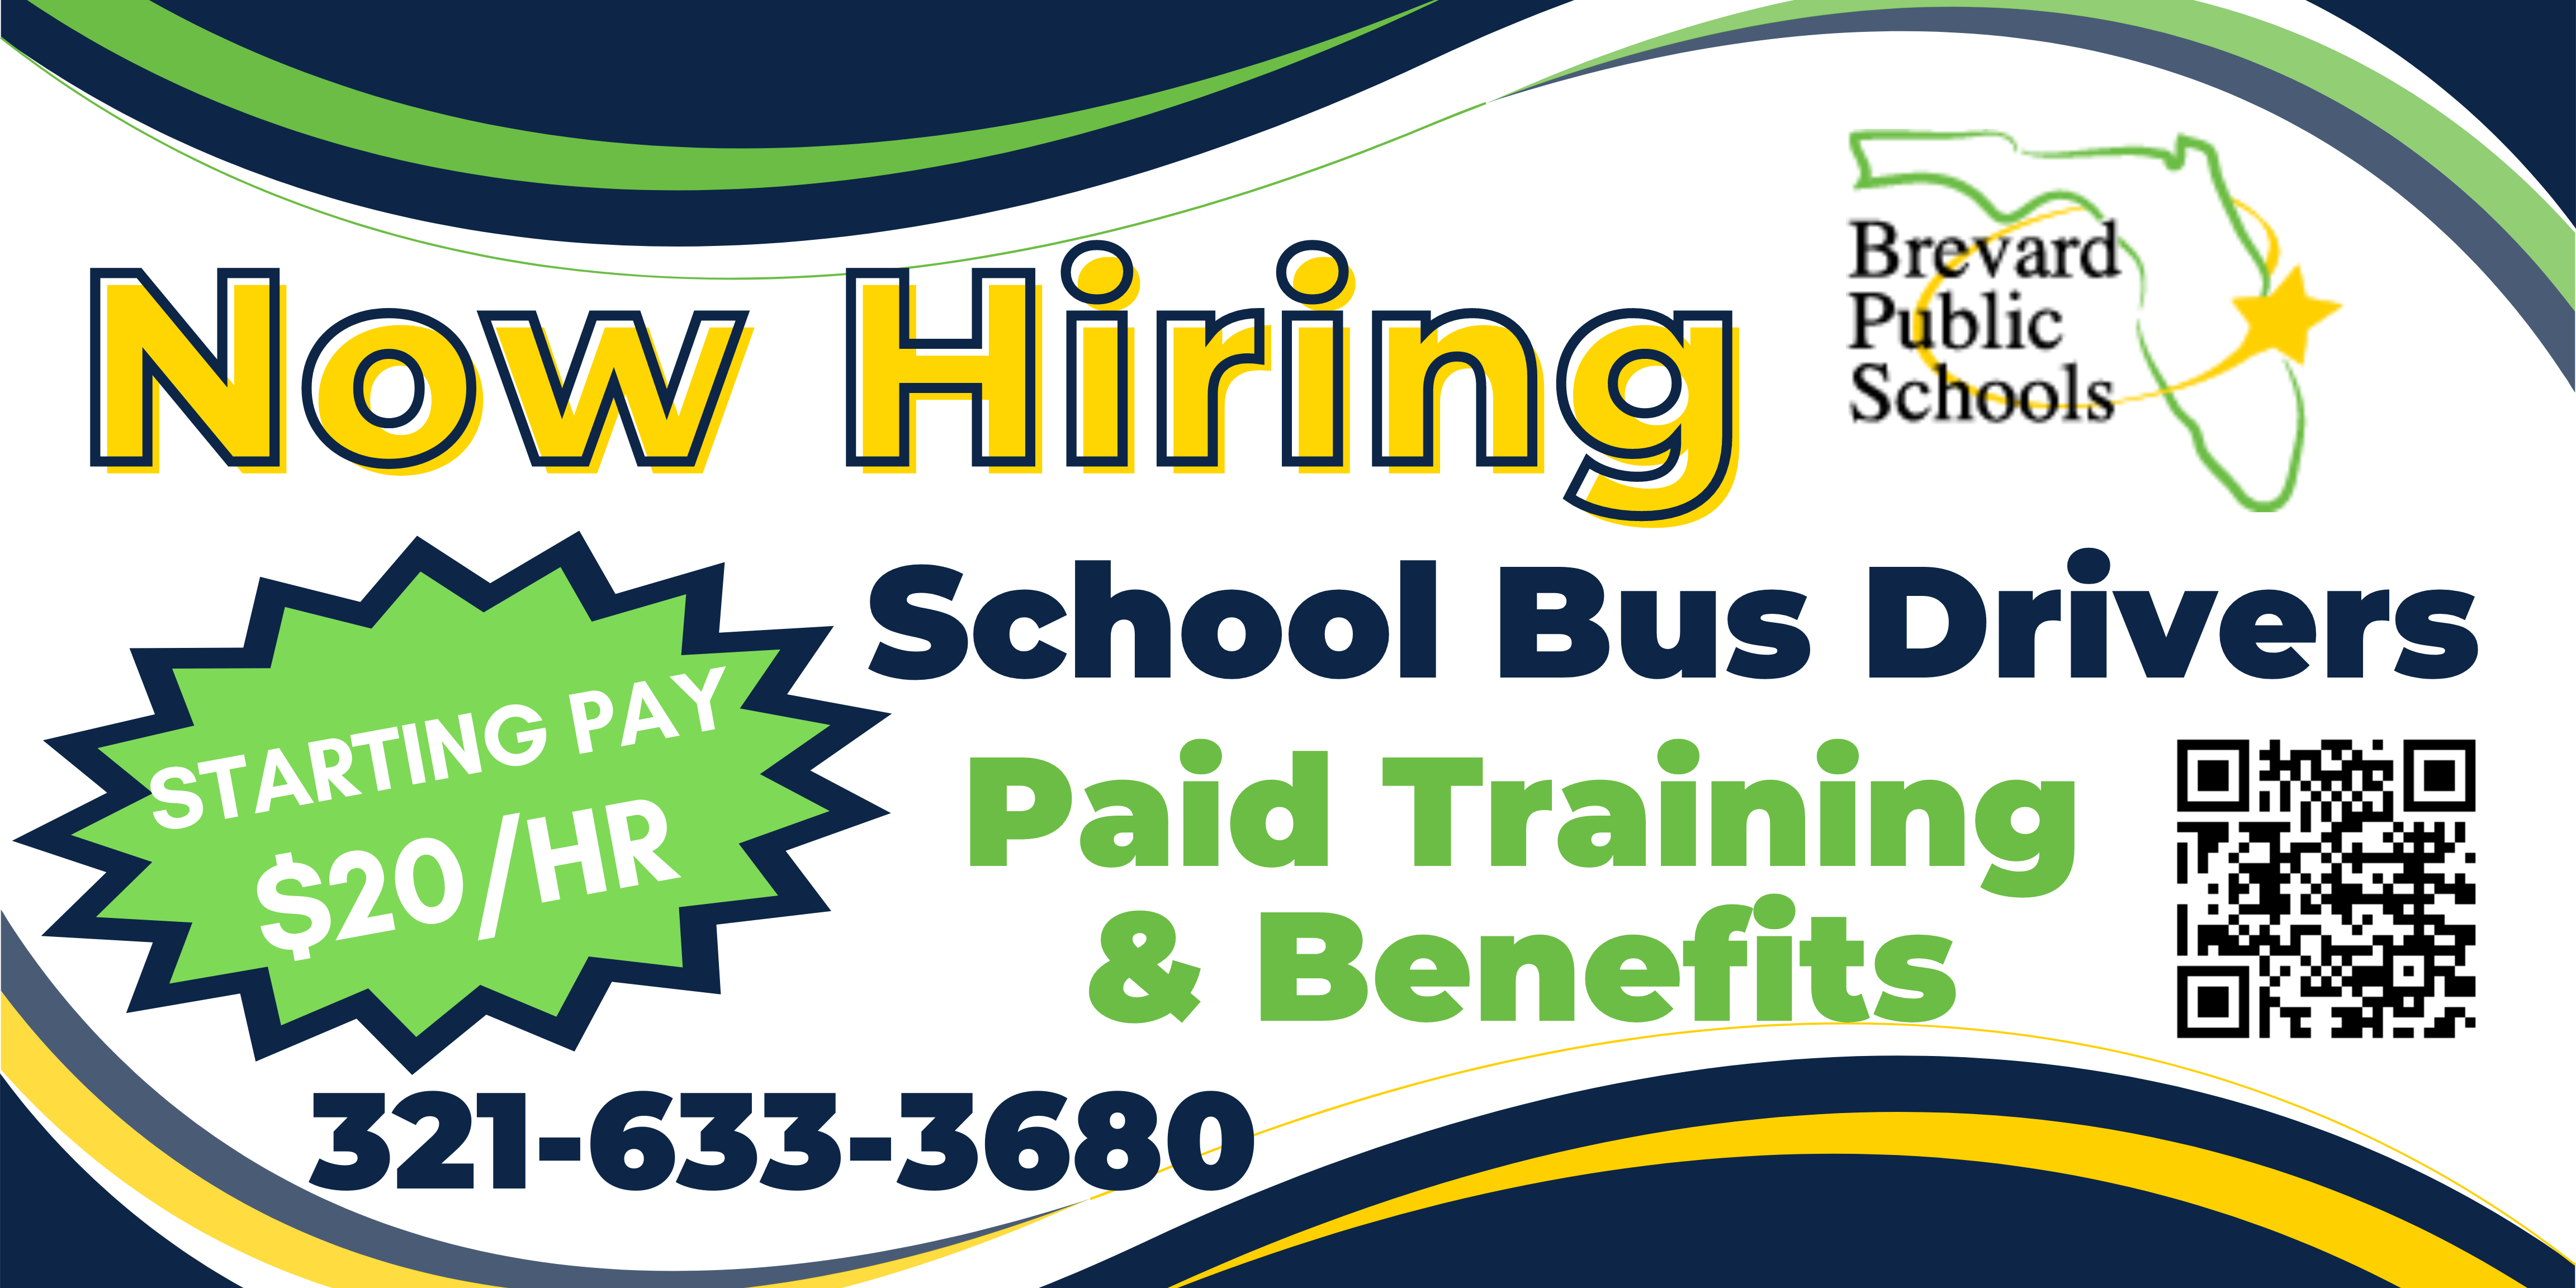 Now Hiring School Bus Drivers, Paid Training & Benefits, $20 an hour, 3216333680